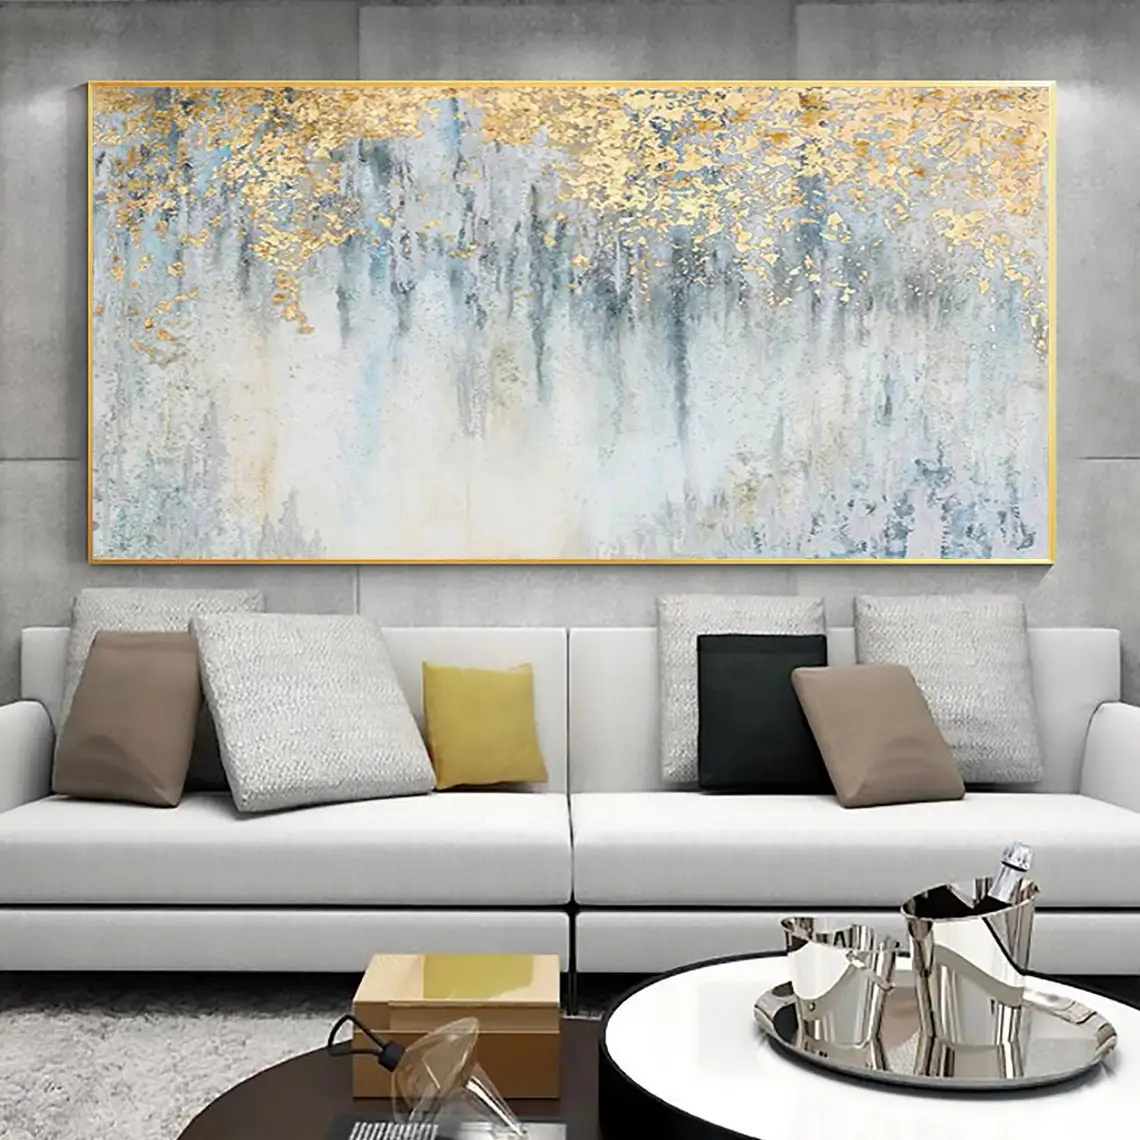 Abstract Gold Leaf Oil Painting On Canvas Modern Foil Texture Acrylic Handmade Painting Living Room Large Wall Art Home Decor